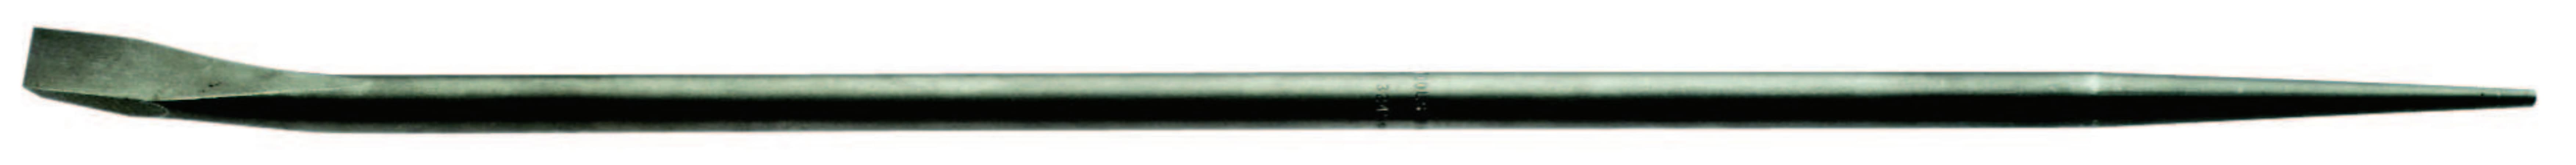 Connecting Bar, 30, 3/4 Stock, Offset Chisel and Straight Tapered Point, Round